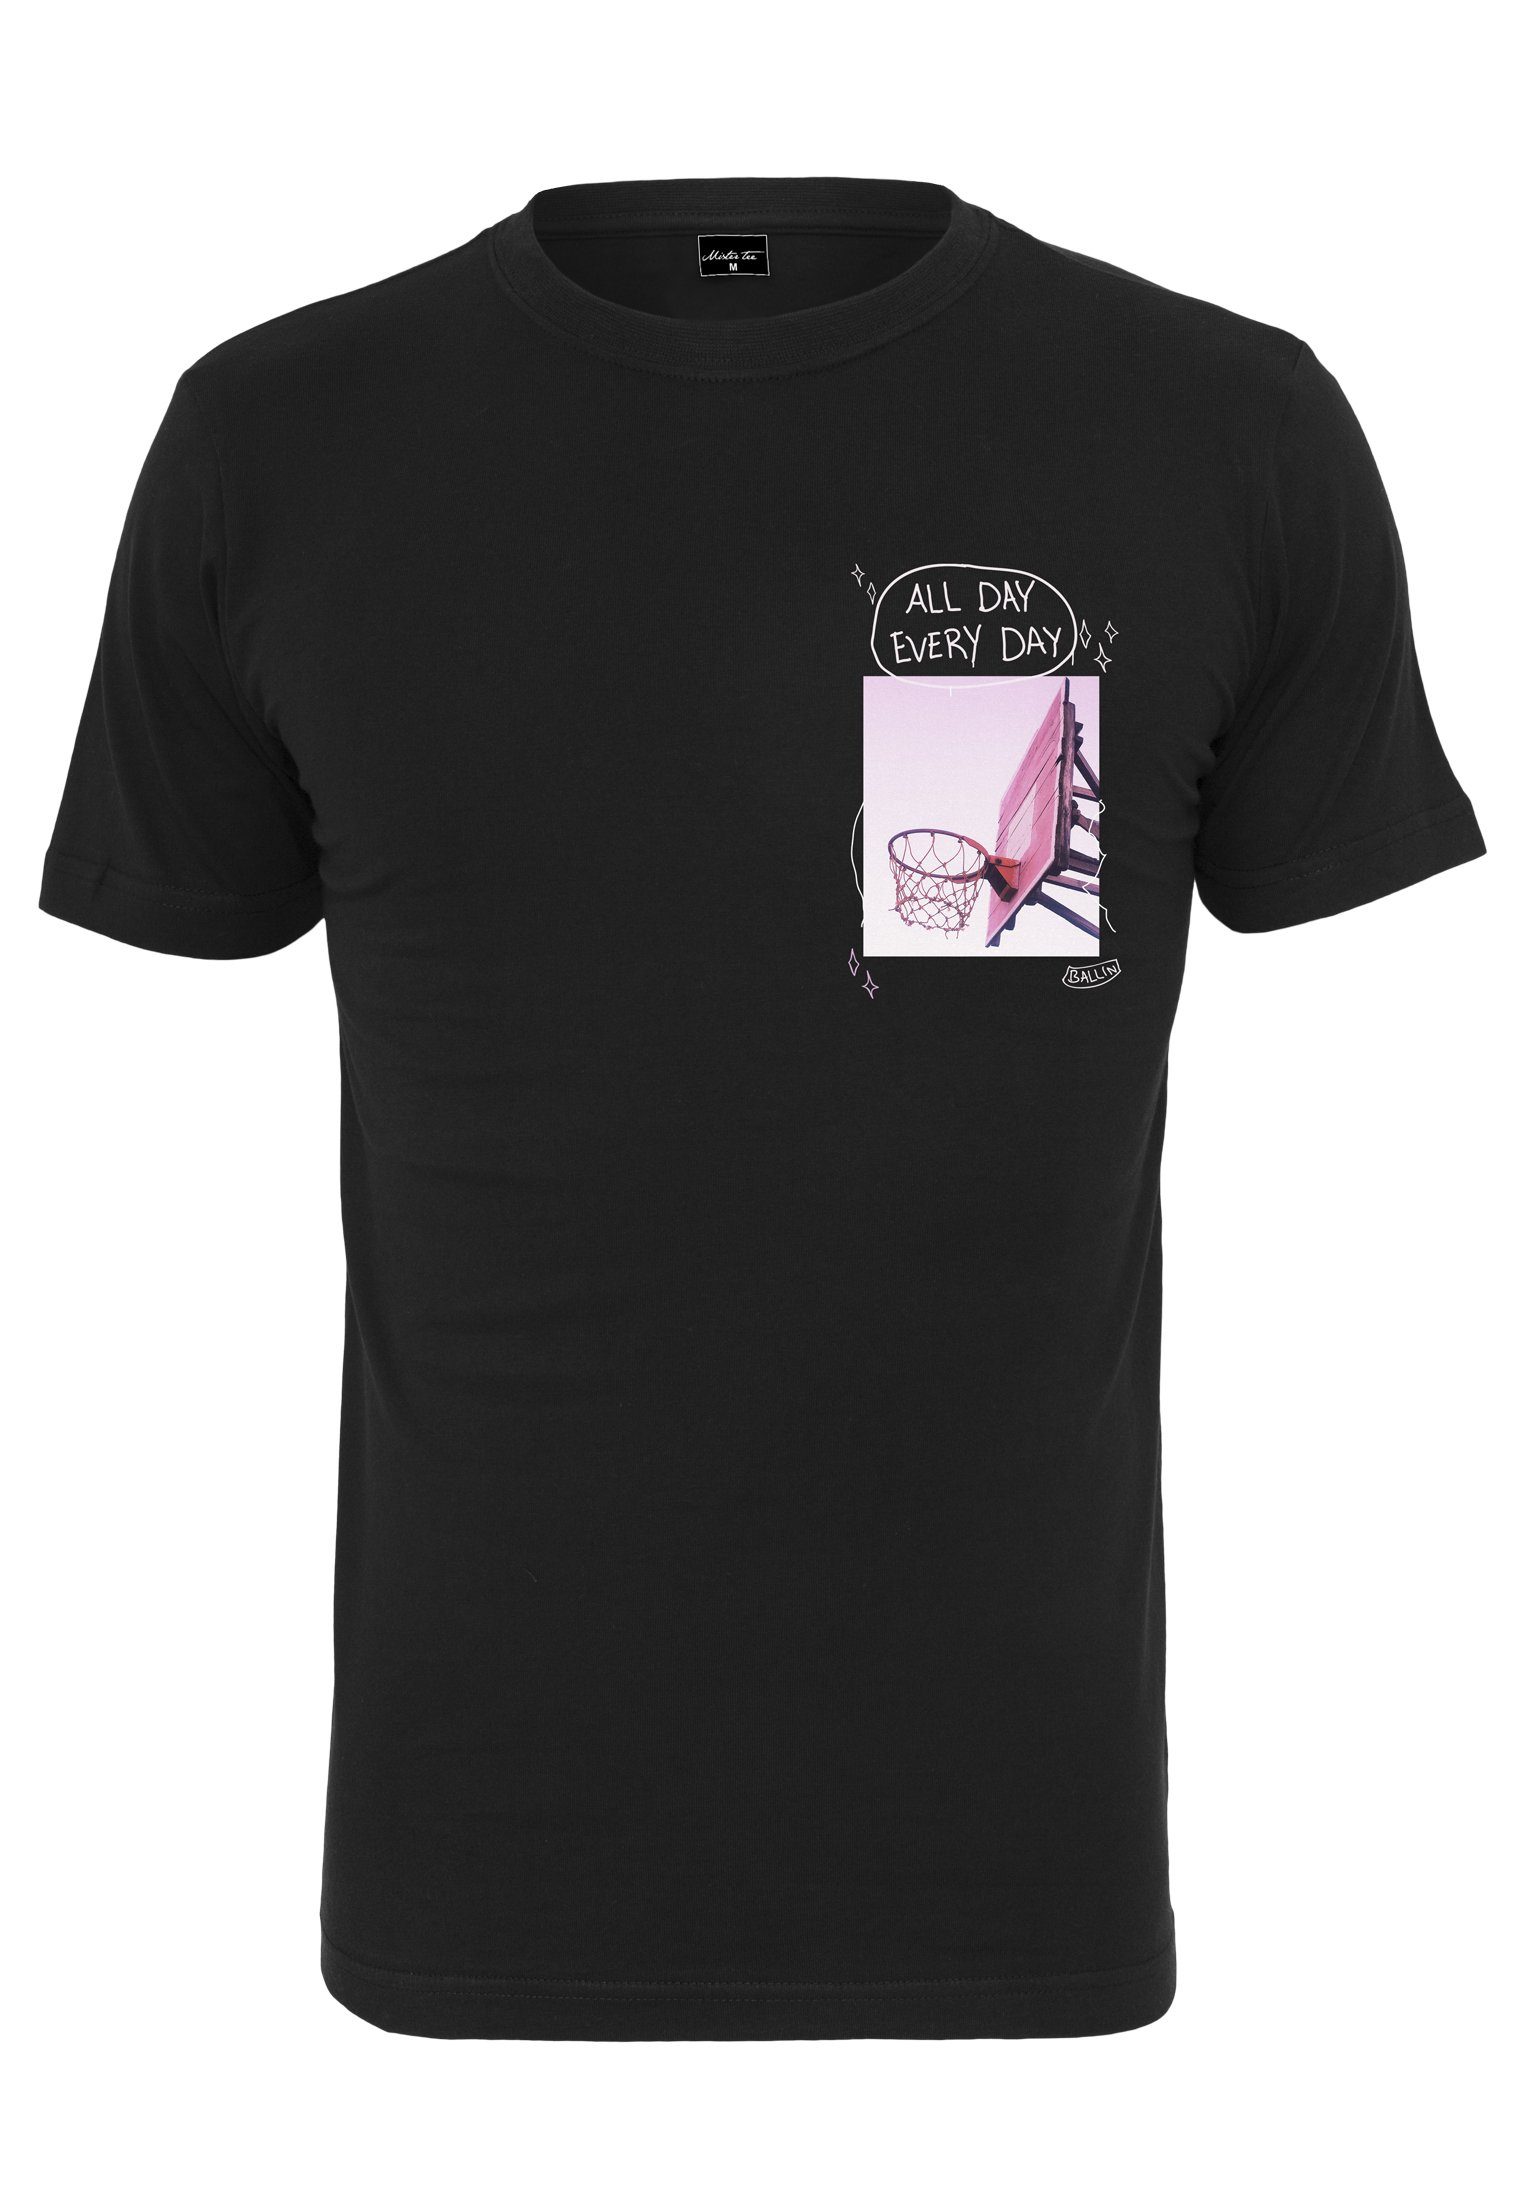 MisterTee T-Shirt Herren All Day Every Day Pink Tee (1-tlg)